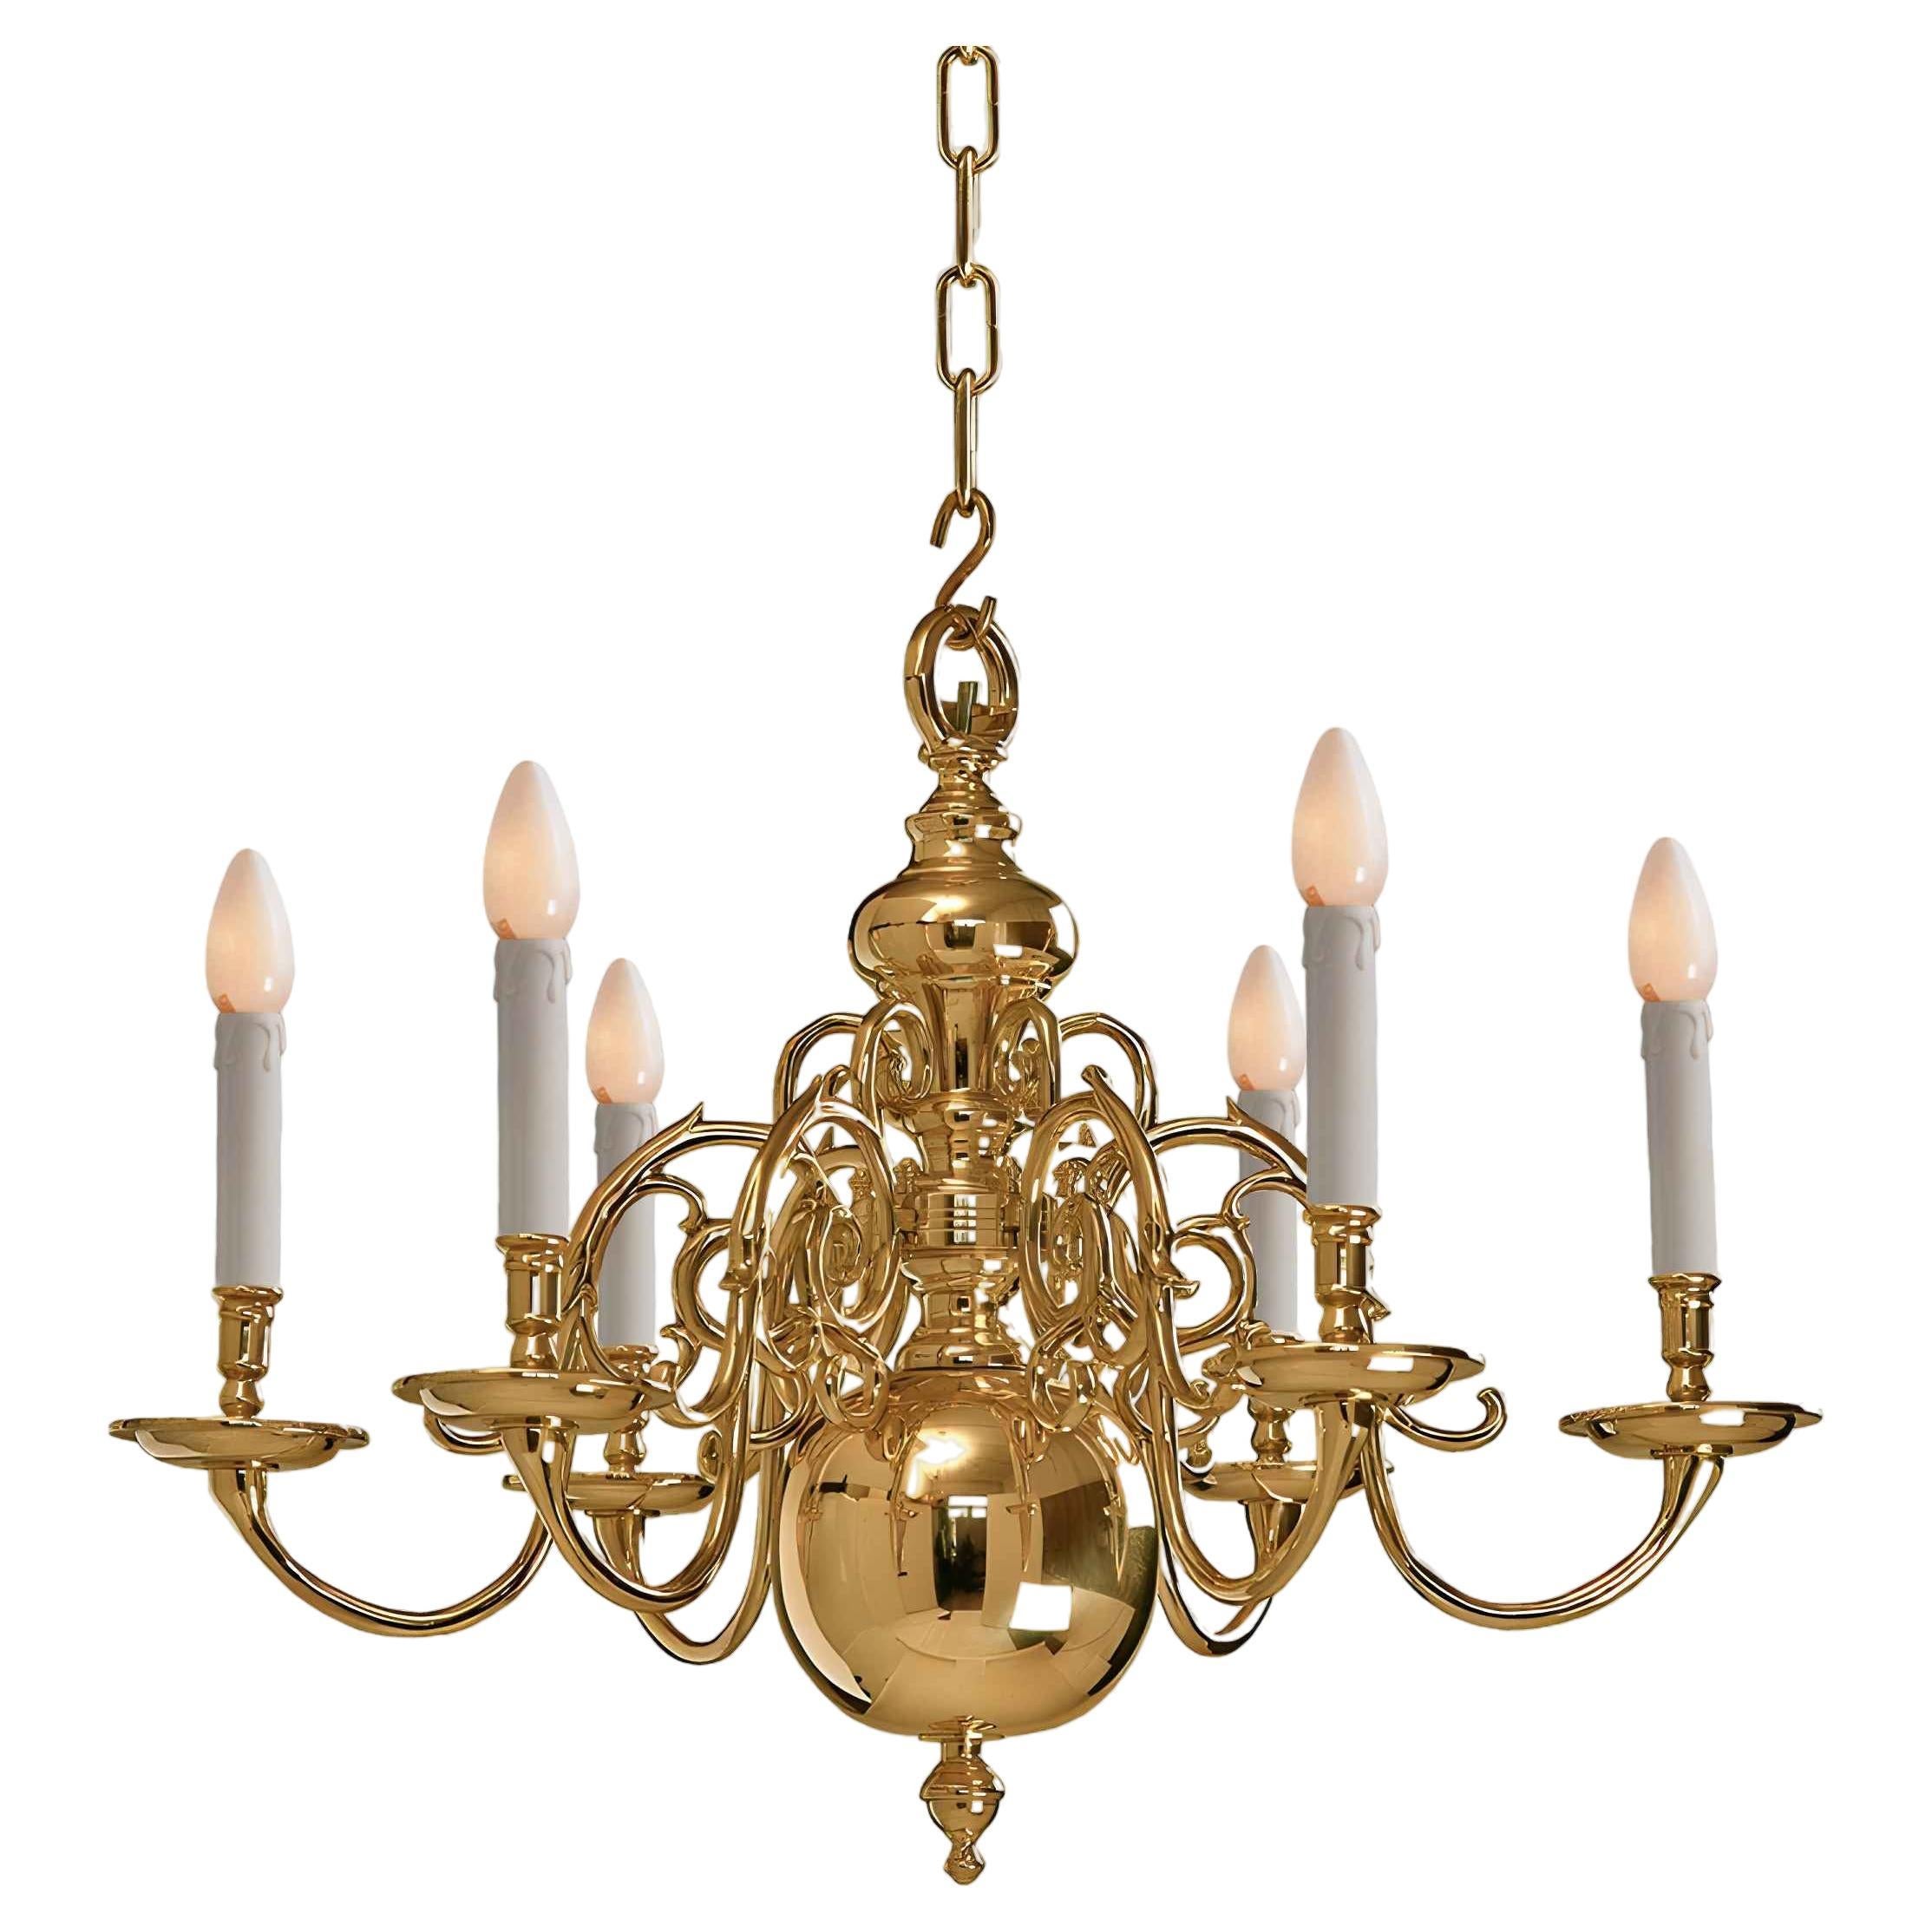 1 Tier 17th Century Electric Model Dutch Brass Chandelier with 6 Lights H62xW85 For Sale